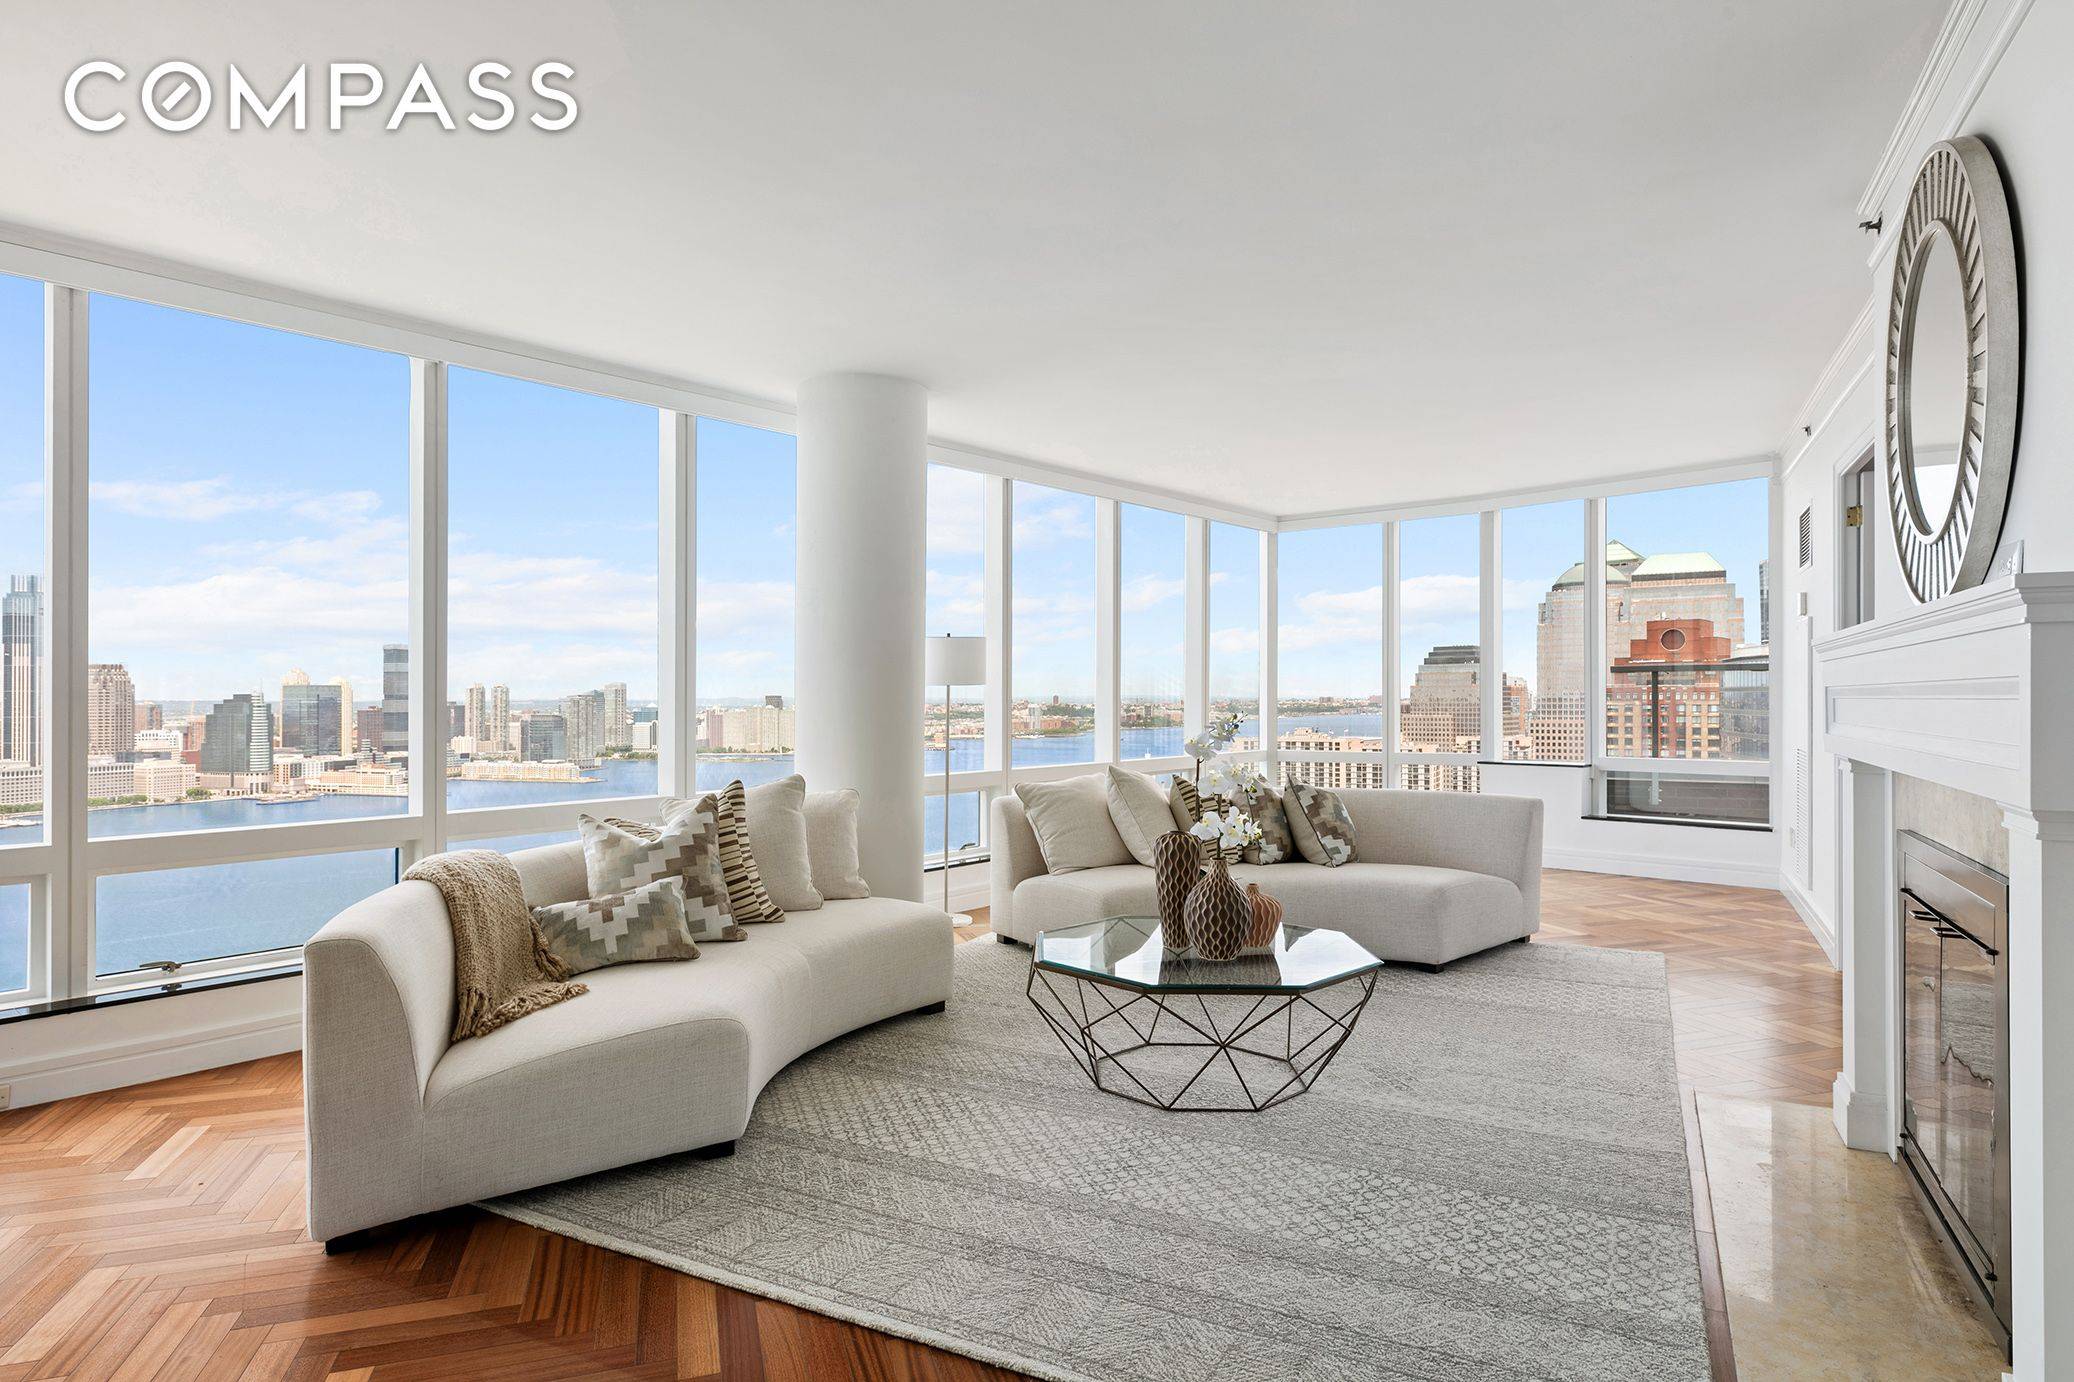 Endless blue water and skyline views surround you in this four bedroom, five bathroom duplex penthouse home creating an inviting, high floor oasis in one of Battery Park City's most ...